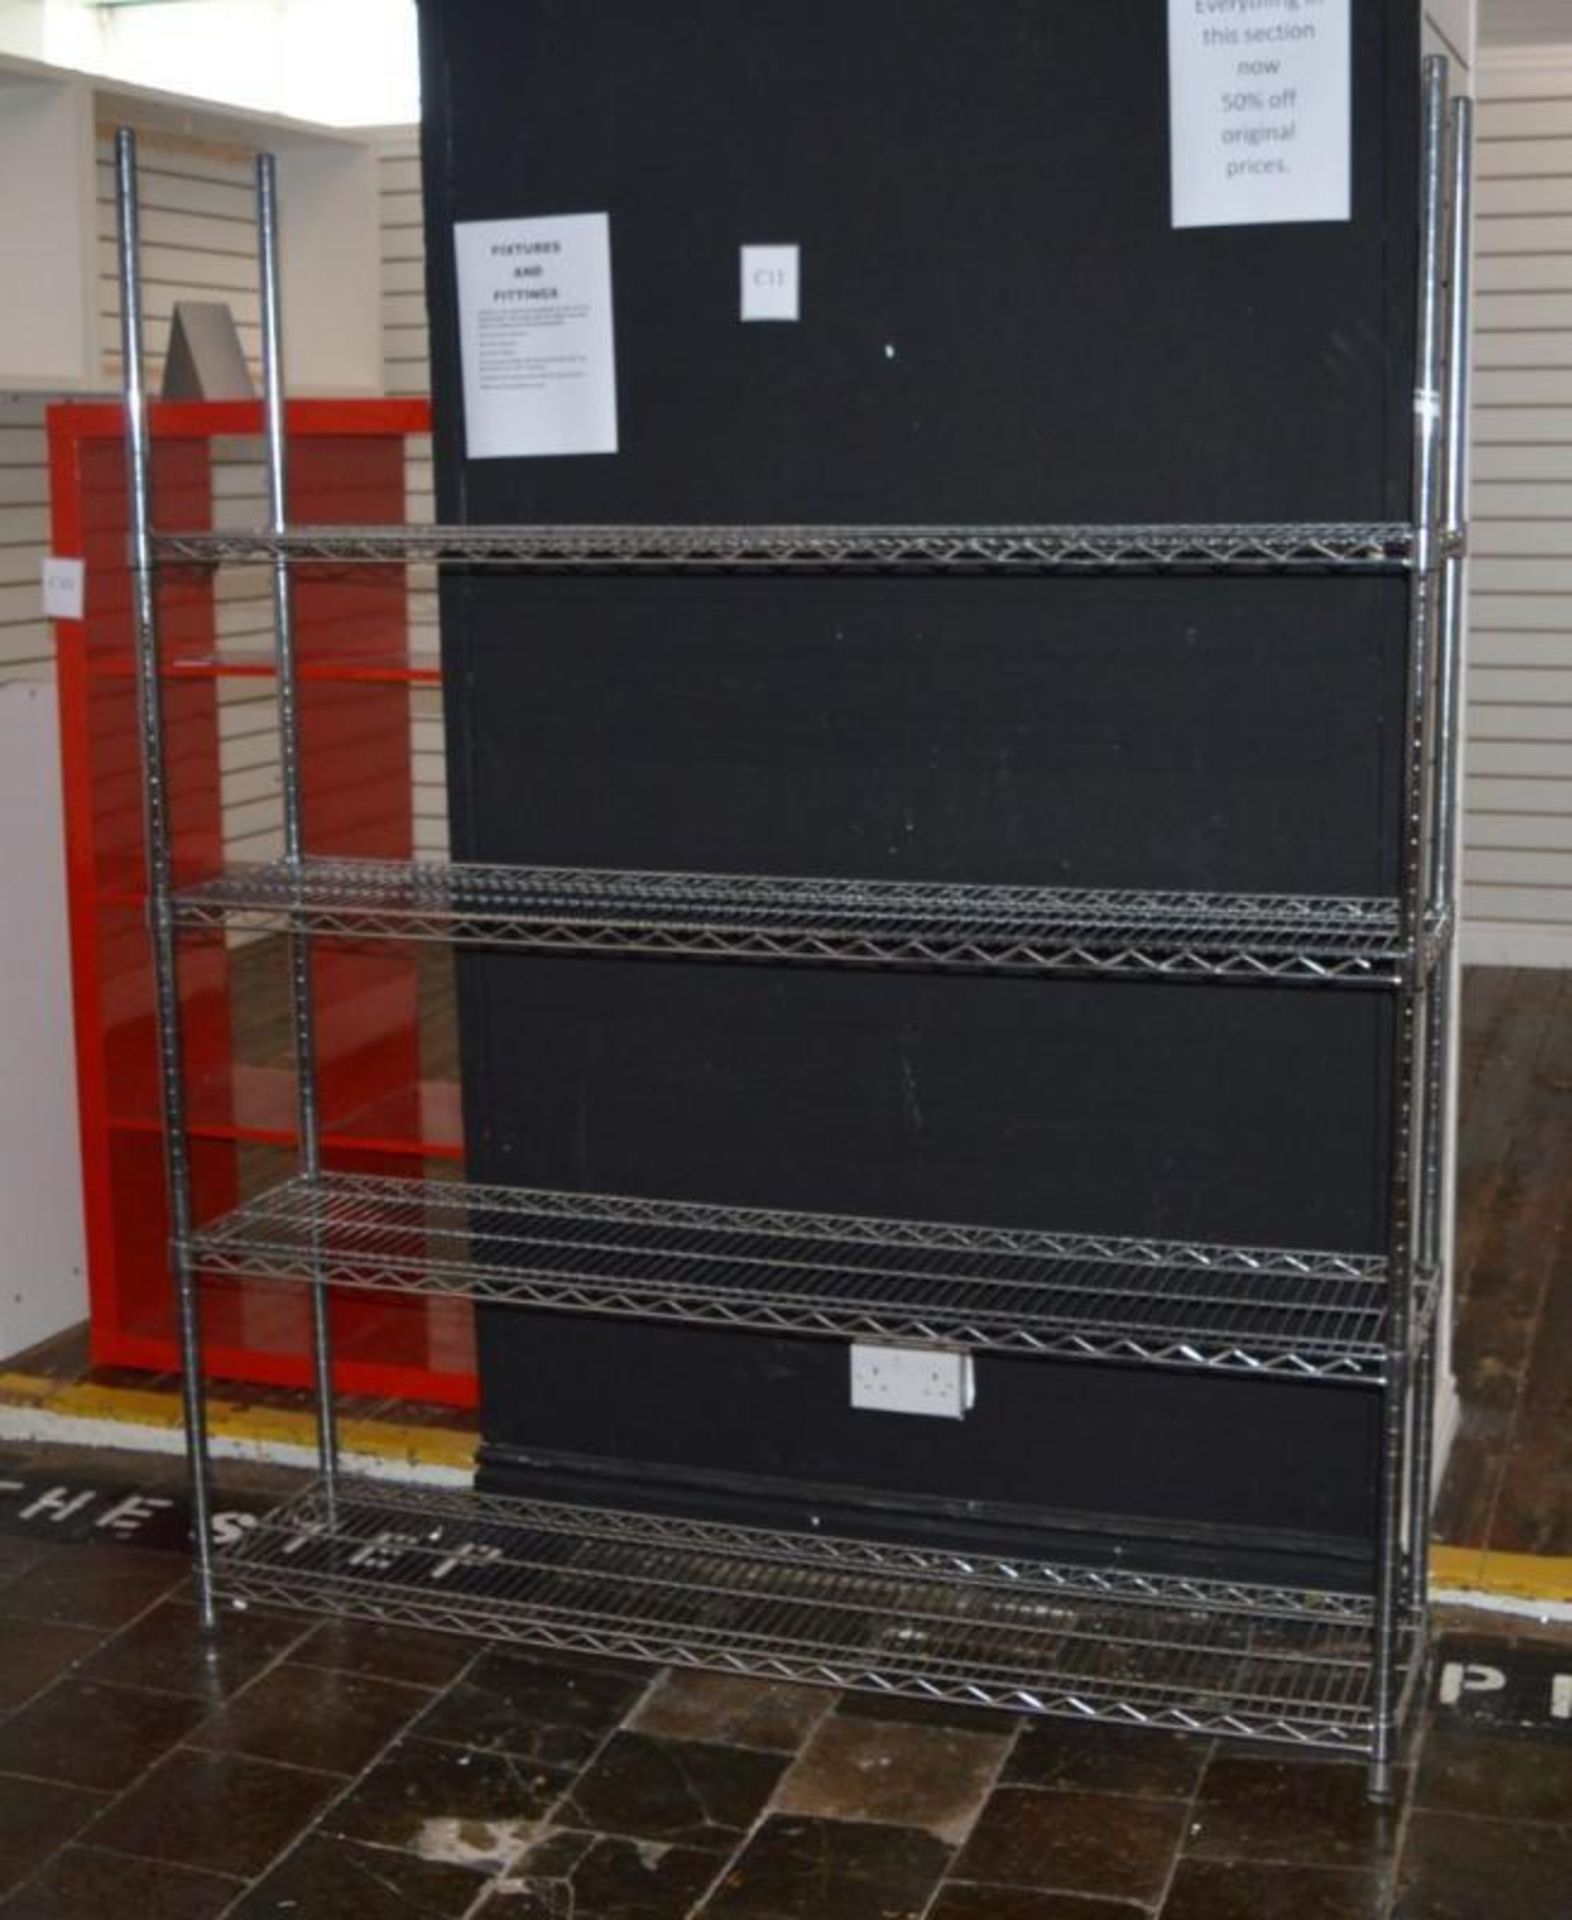 1 x Four Tier Commercial Kitchen Wire Shelving Rack - H185 x W153 x D46 cms - Used For None Food Sto